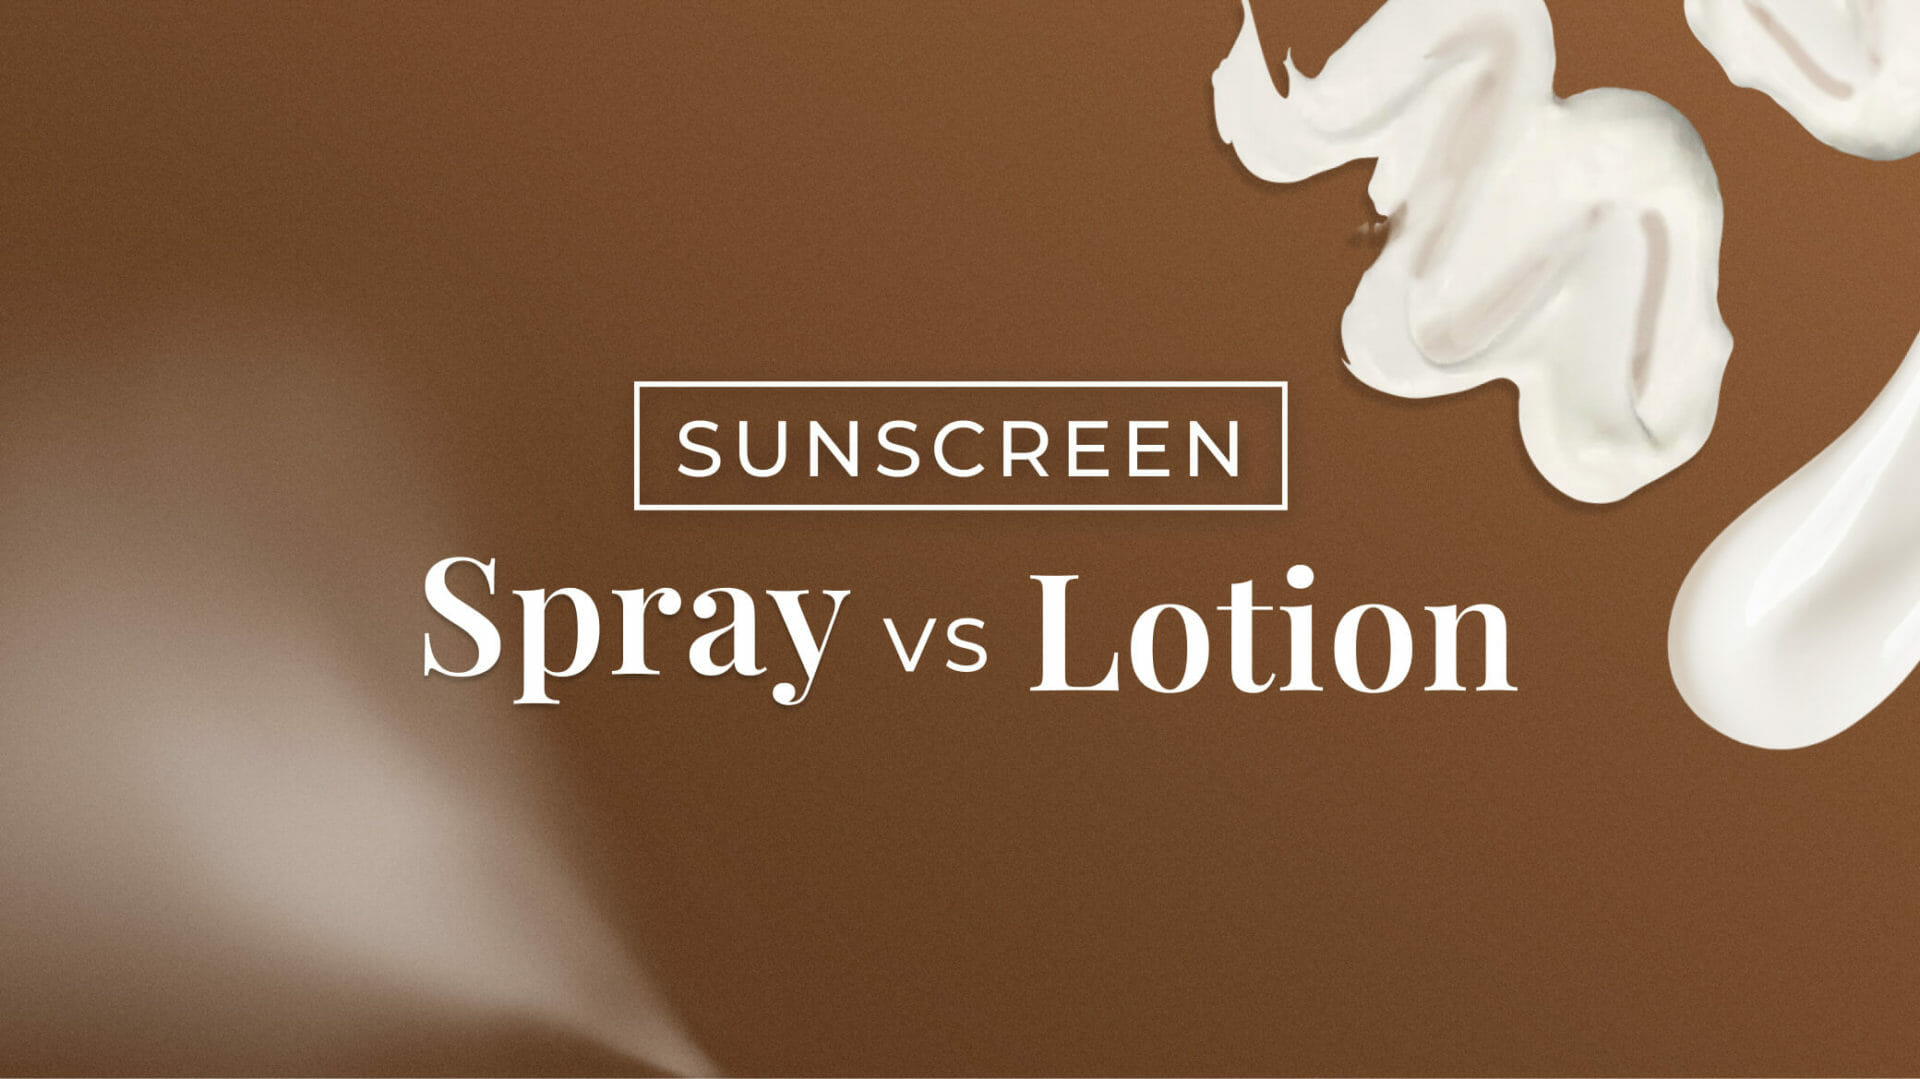 Sunscreen Spray vs Lotion: Which is Best?